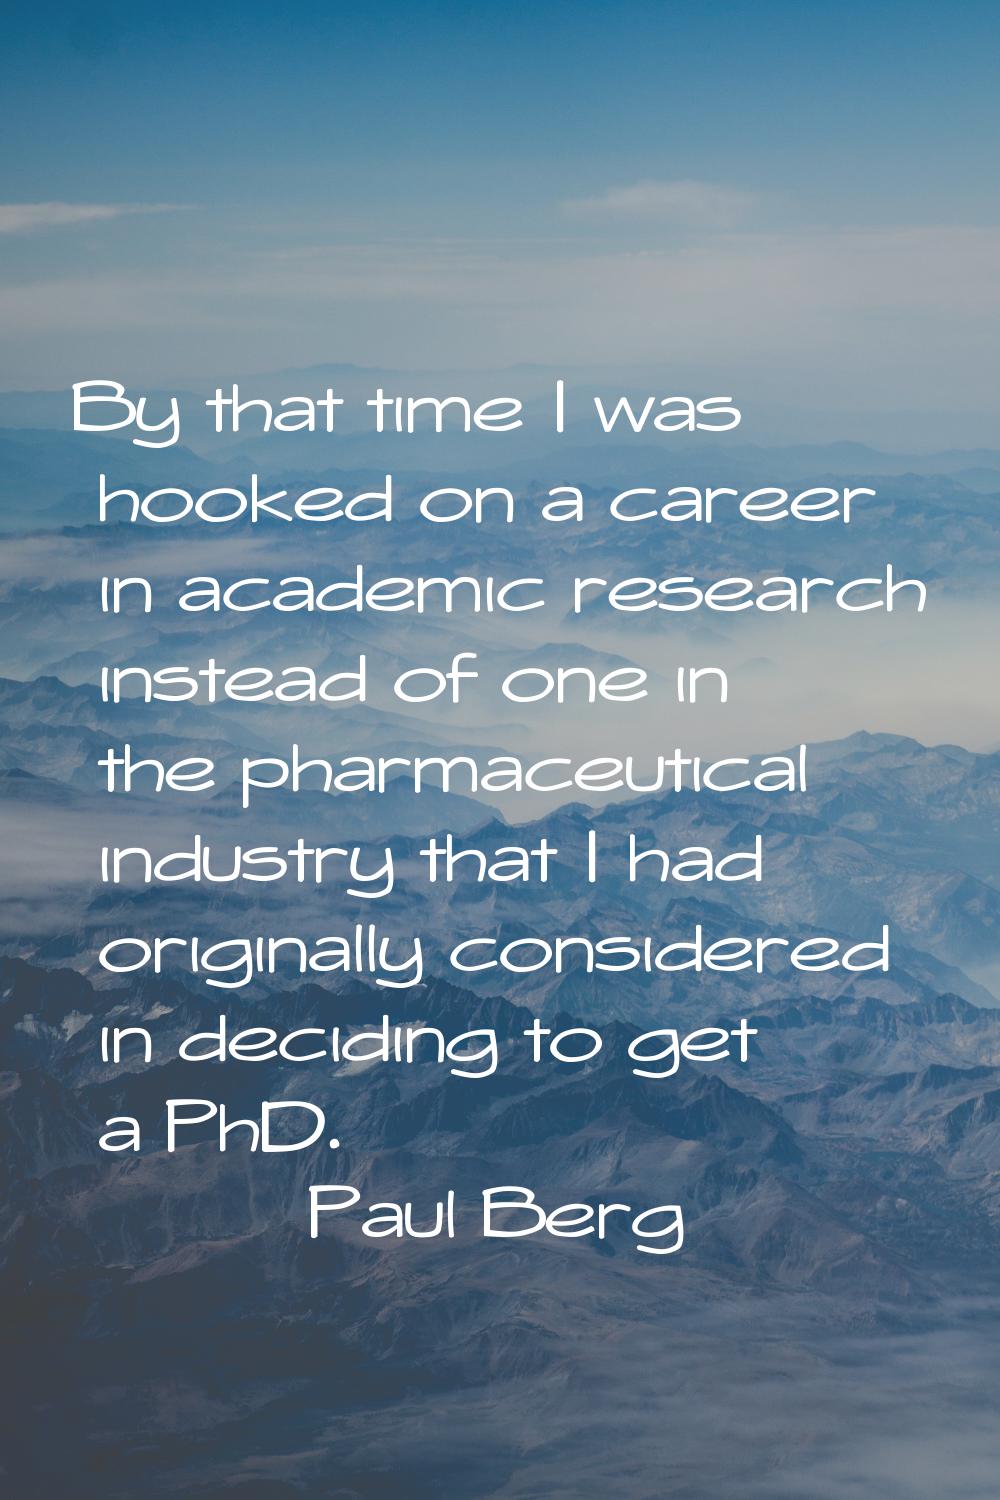 By that time I was hooked on a career in academic research instead of one in the pharmaceutical ind